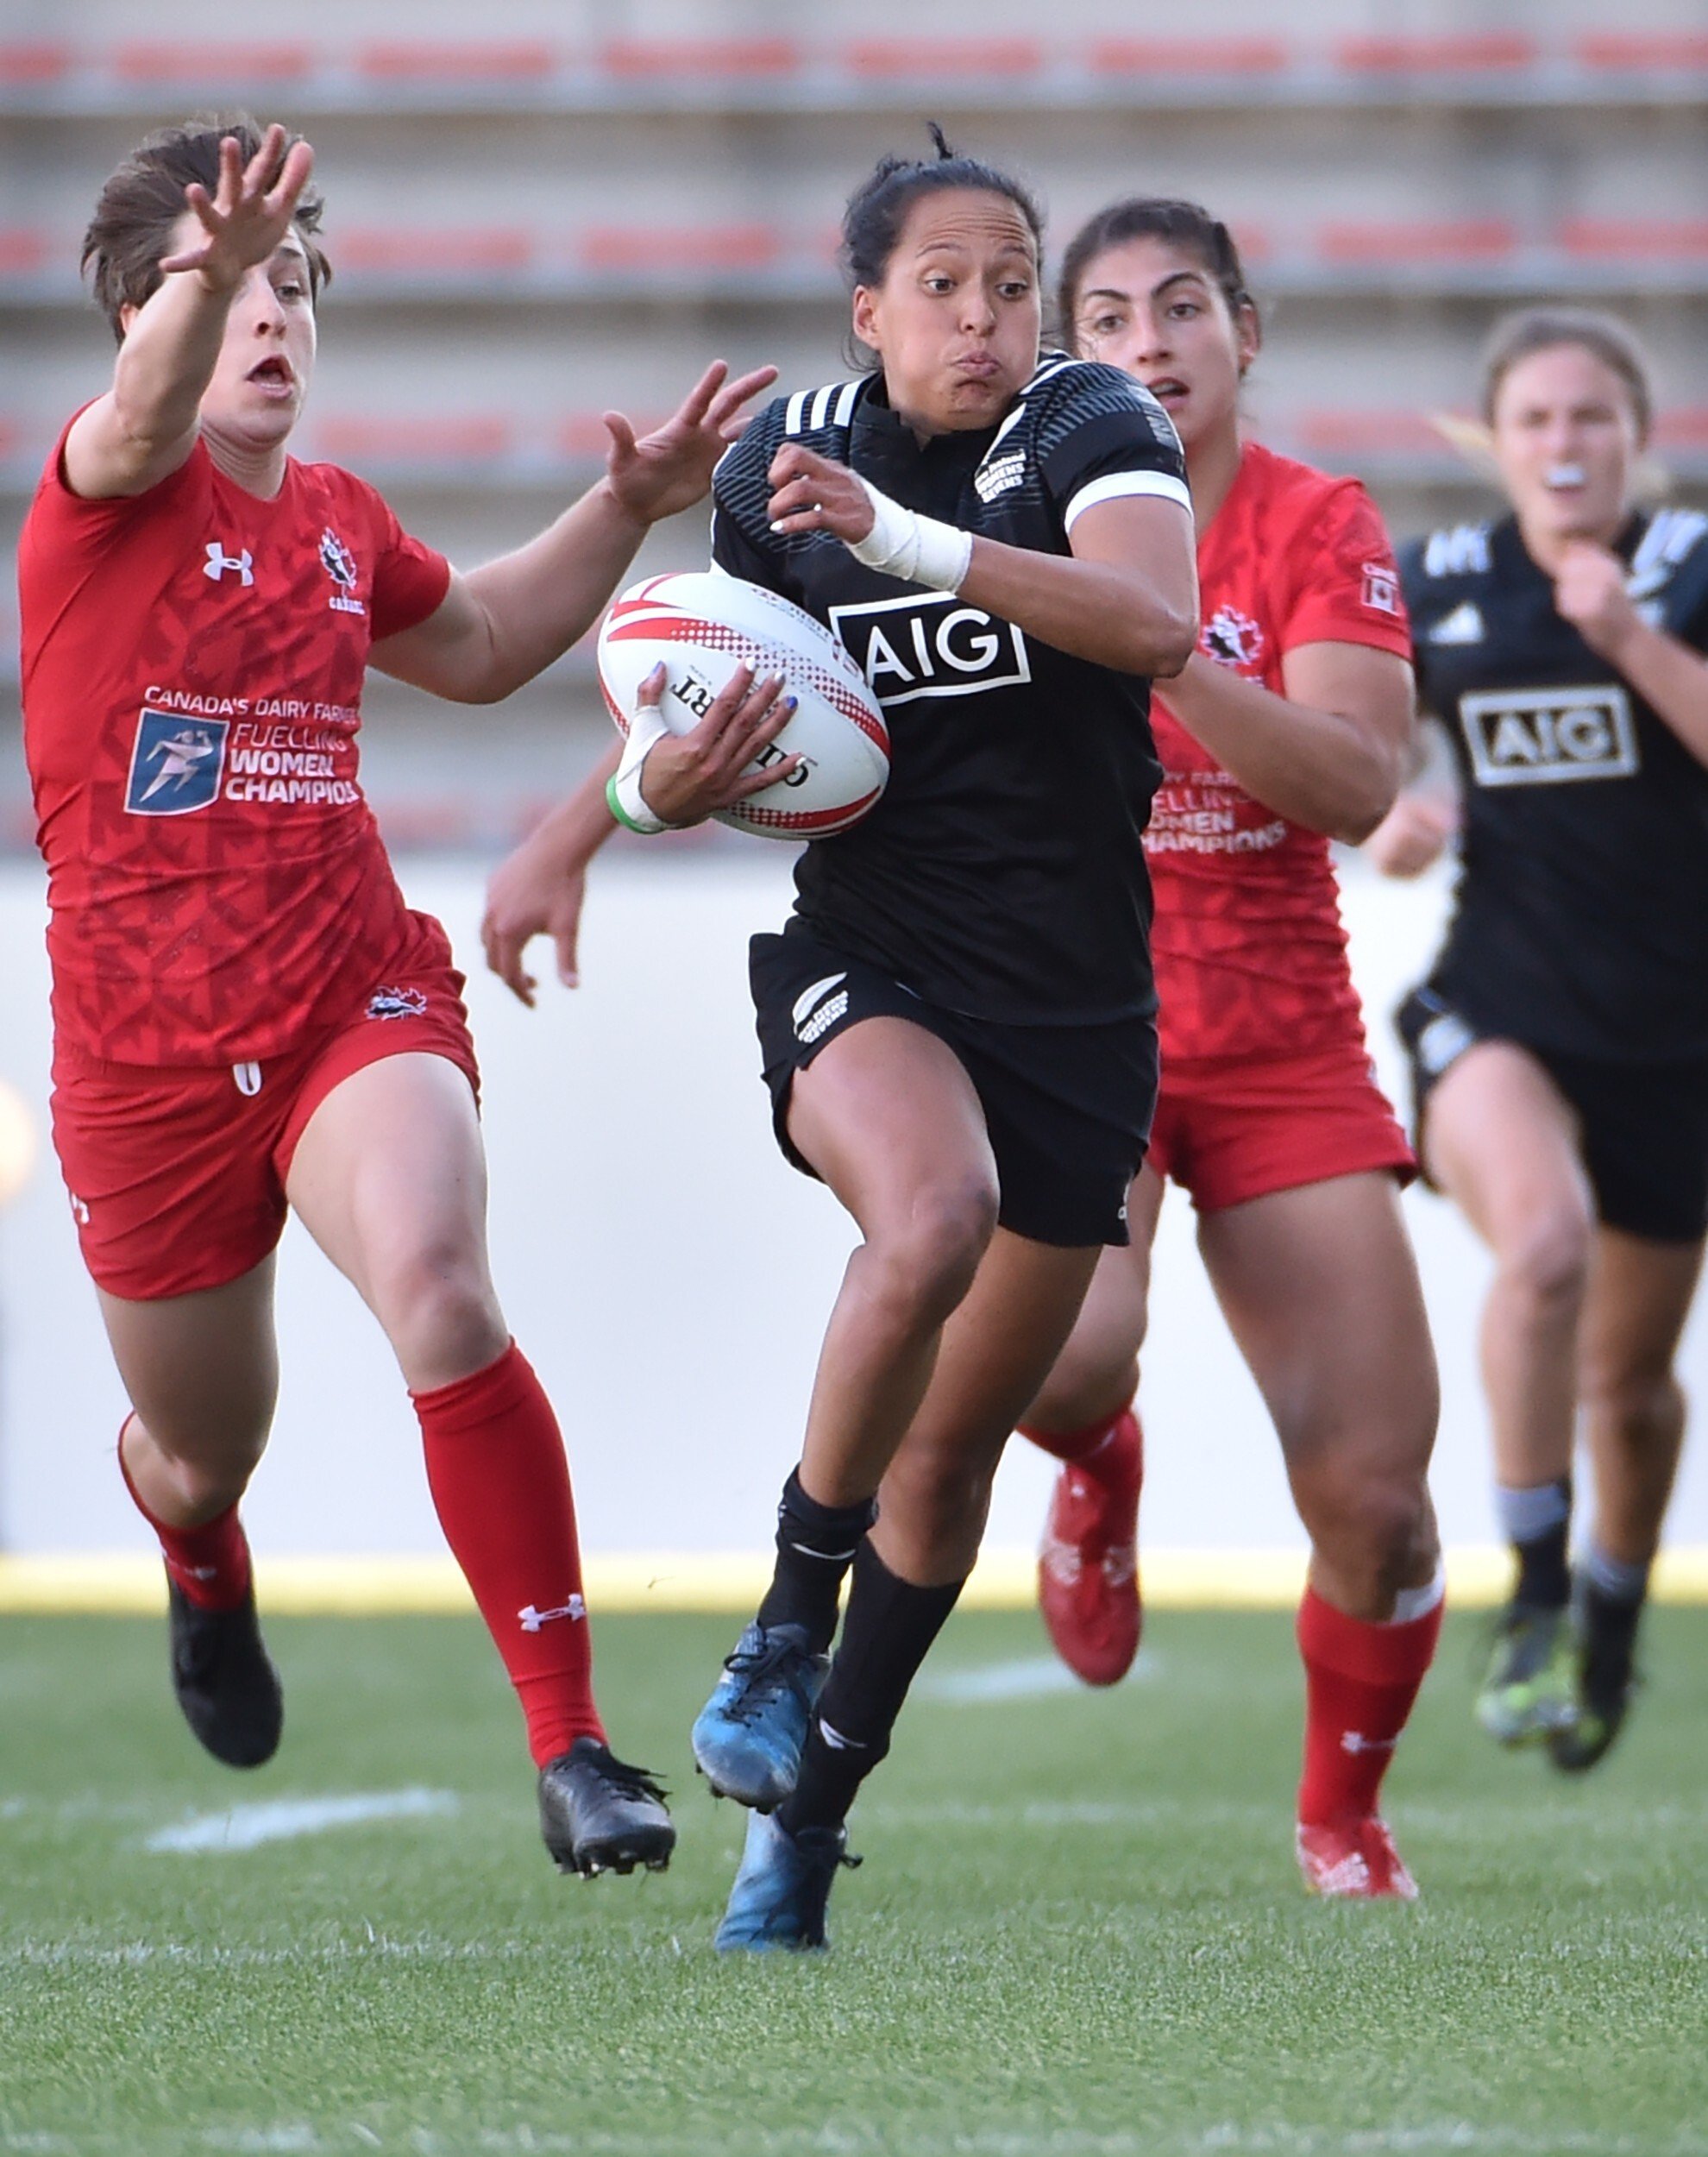 New Zealand’s Tyla Nathan-Wong escaping Canadian clutches during the 2017 World Rugby Women’s Sevens Series final in Kitakyushu, Fukuoka prefecture, Japan. Photo: AFP